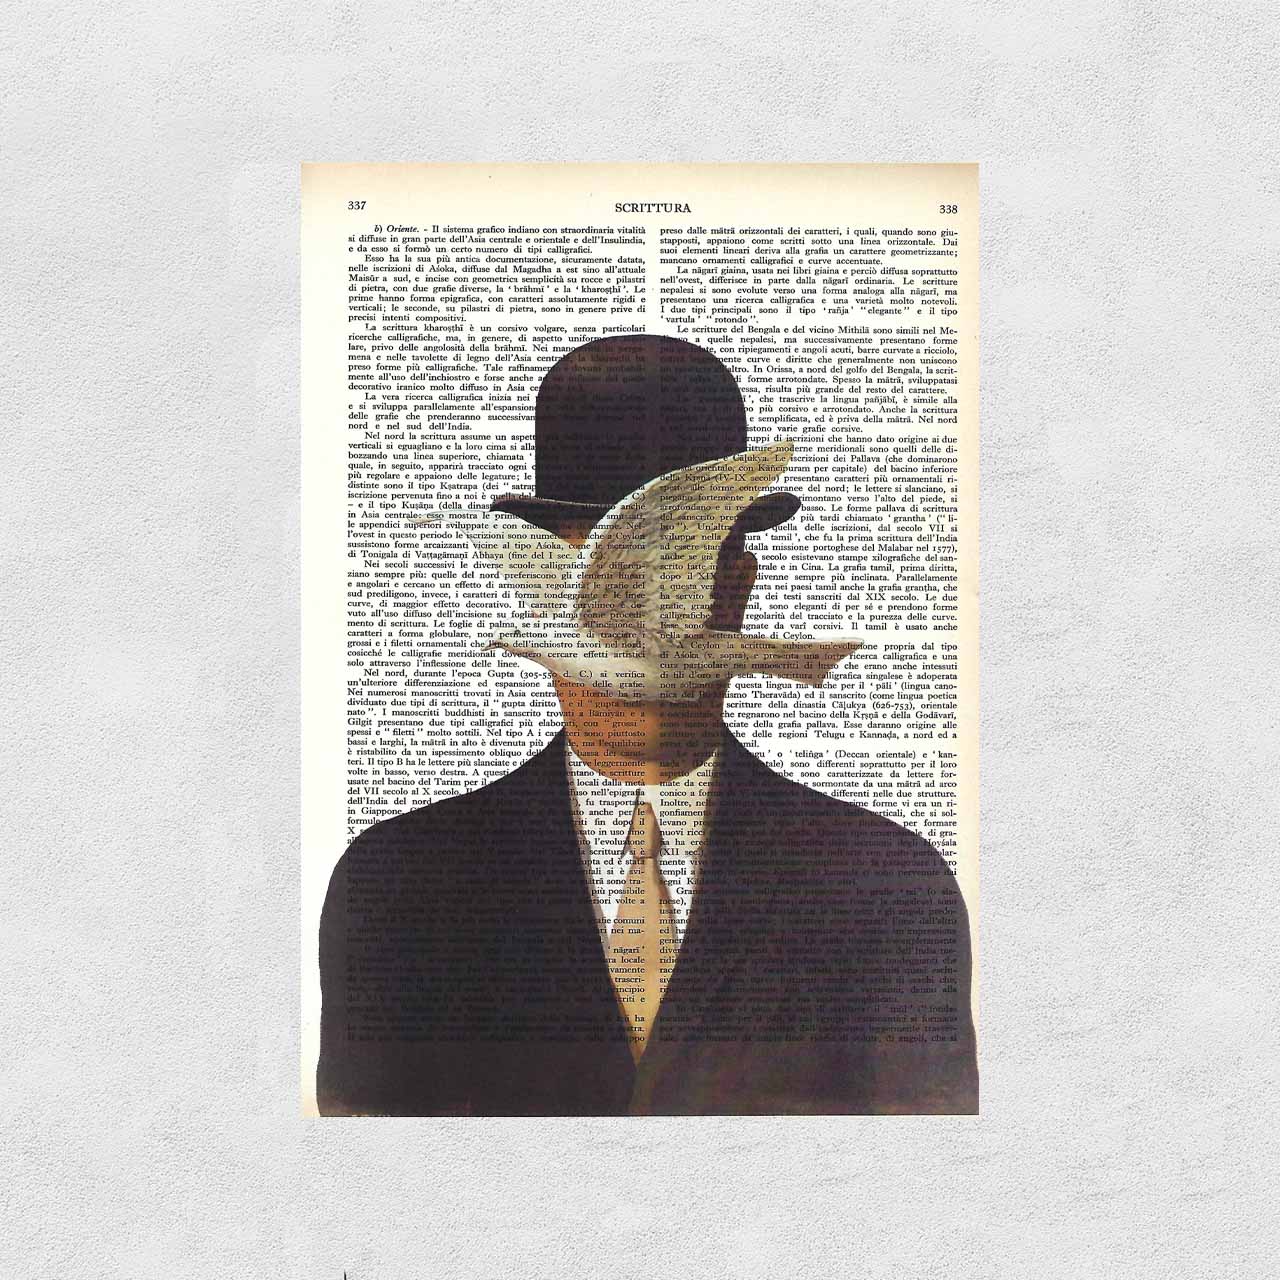 Mix-up: The man in the bowler hat – René Magritte